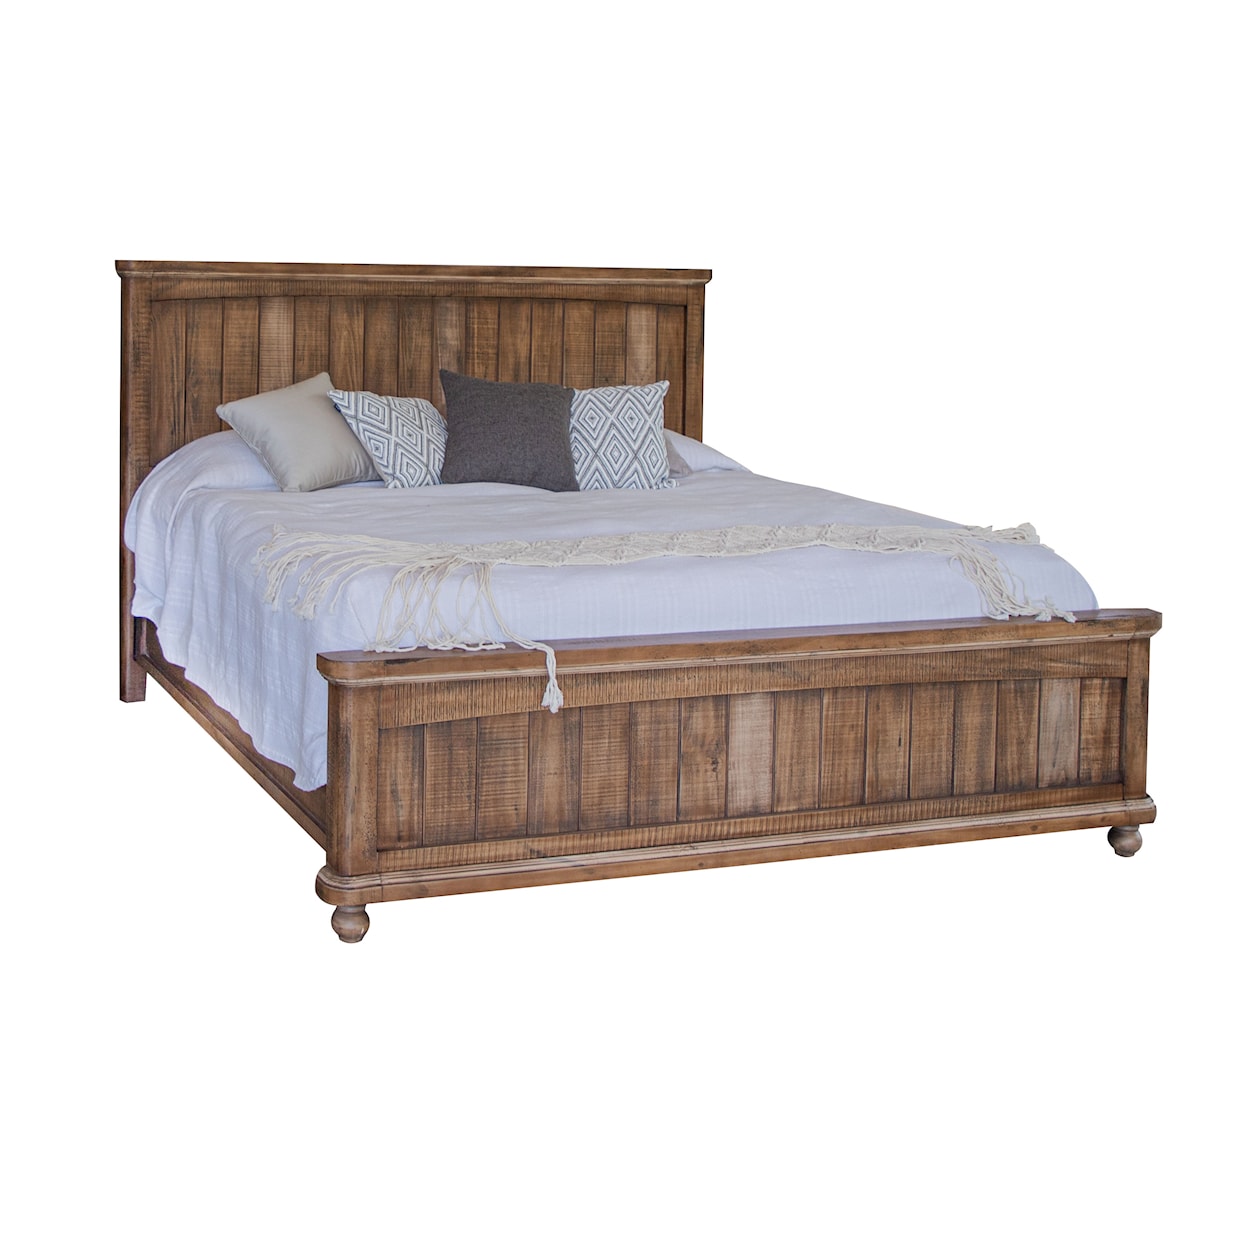 International Furniture Direct Villa Hermosa Bedroom Collection King Bed